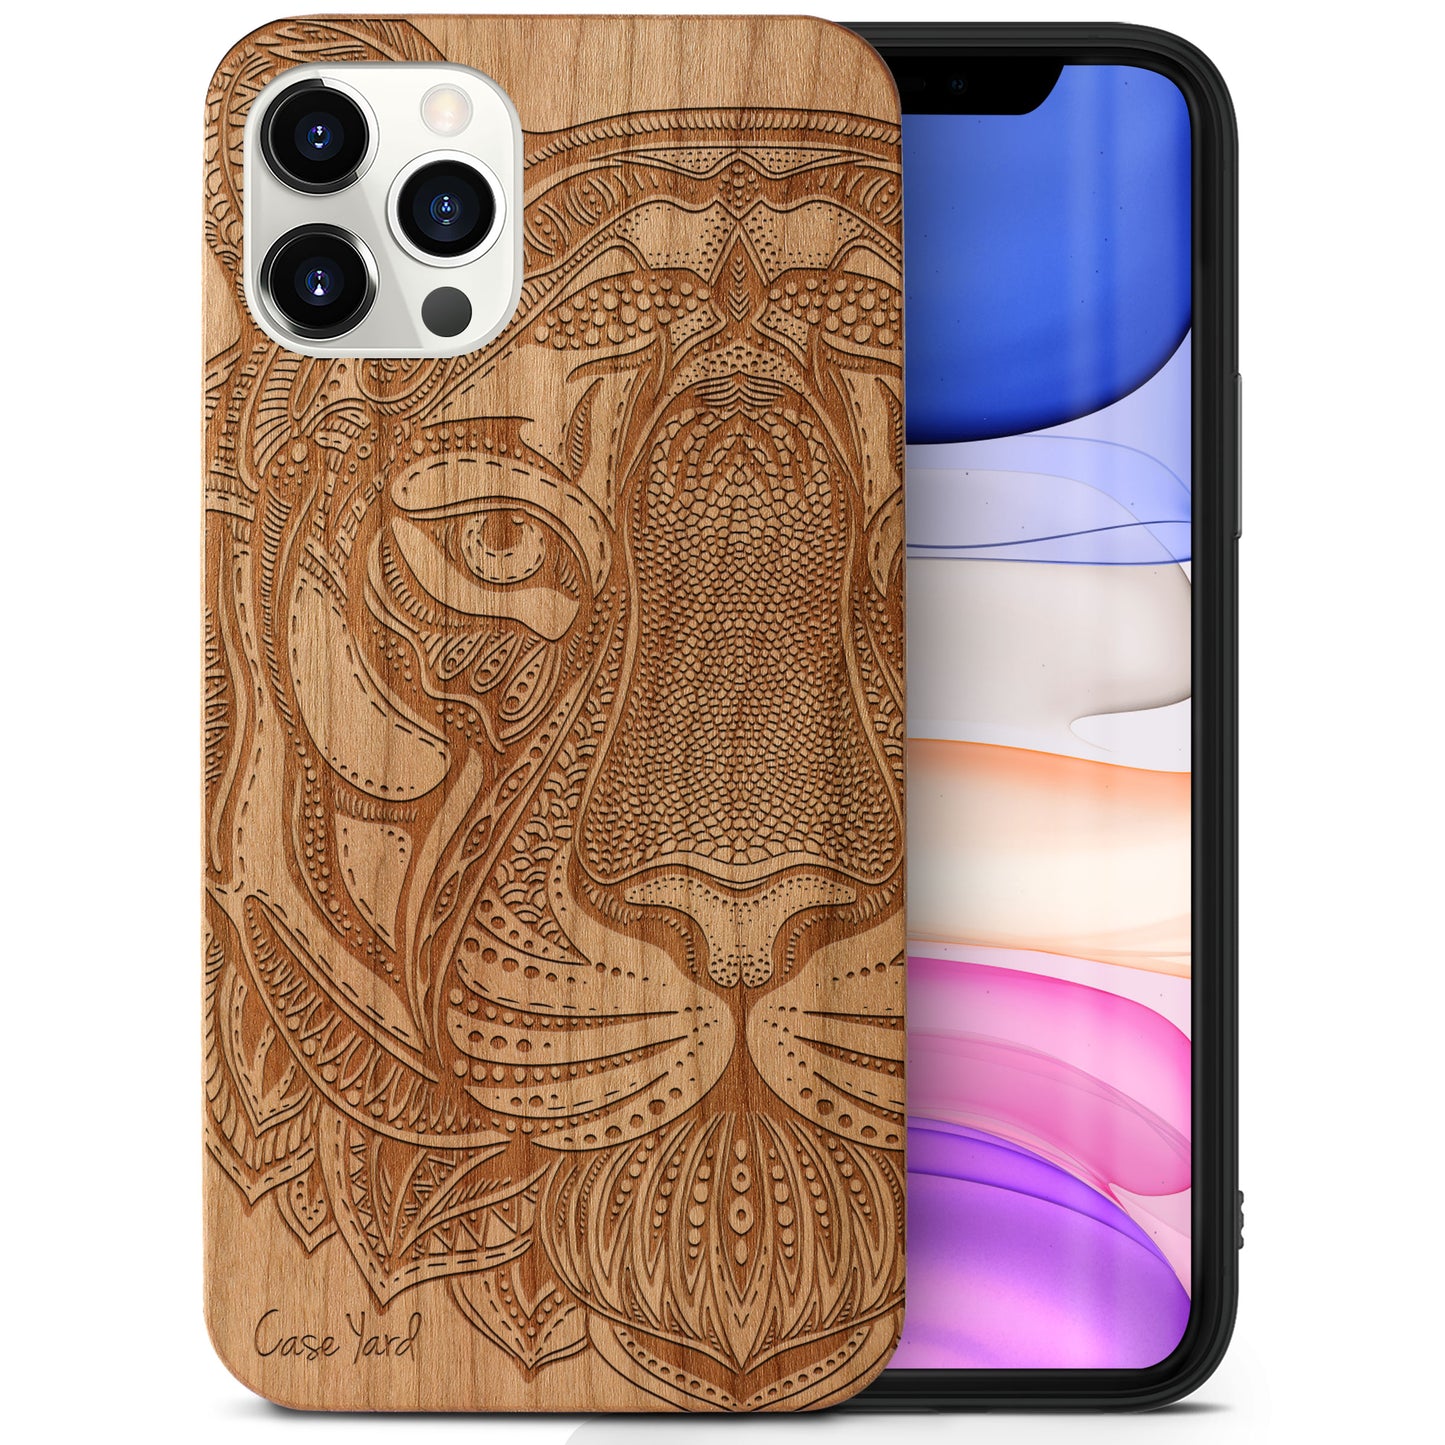 Wooden Cell Phone Case Cover, Laser Engraved case for iPhone & Samsung phone Doodle Tiger Face Design